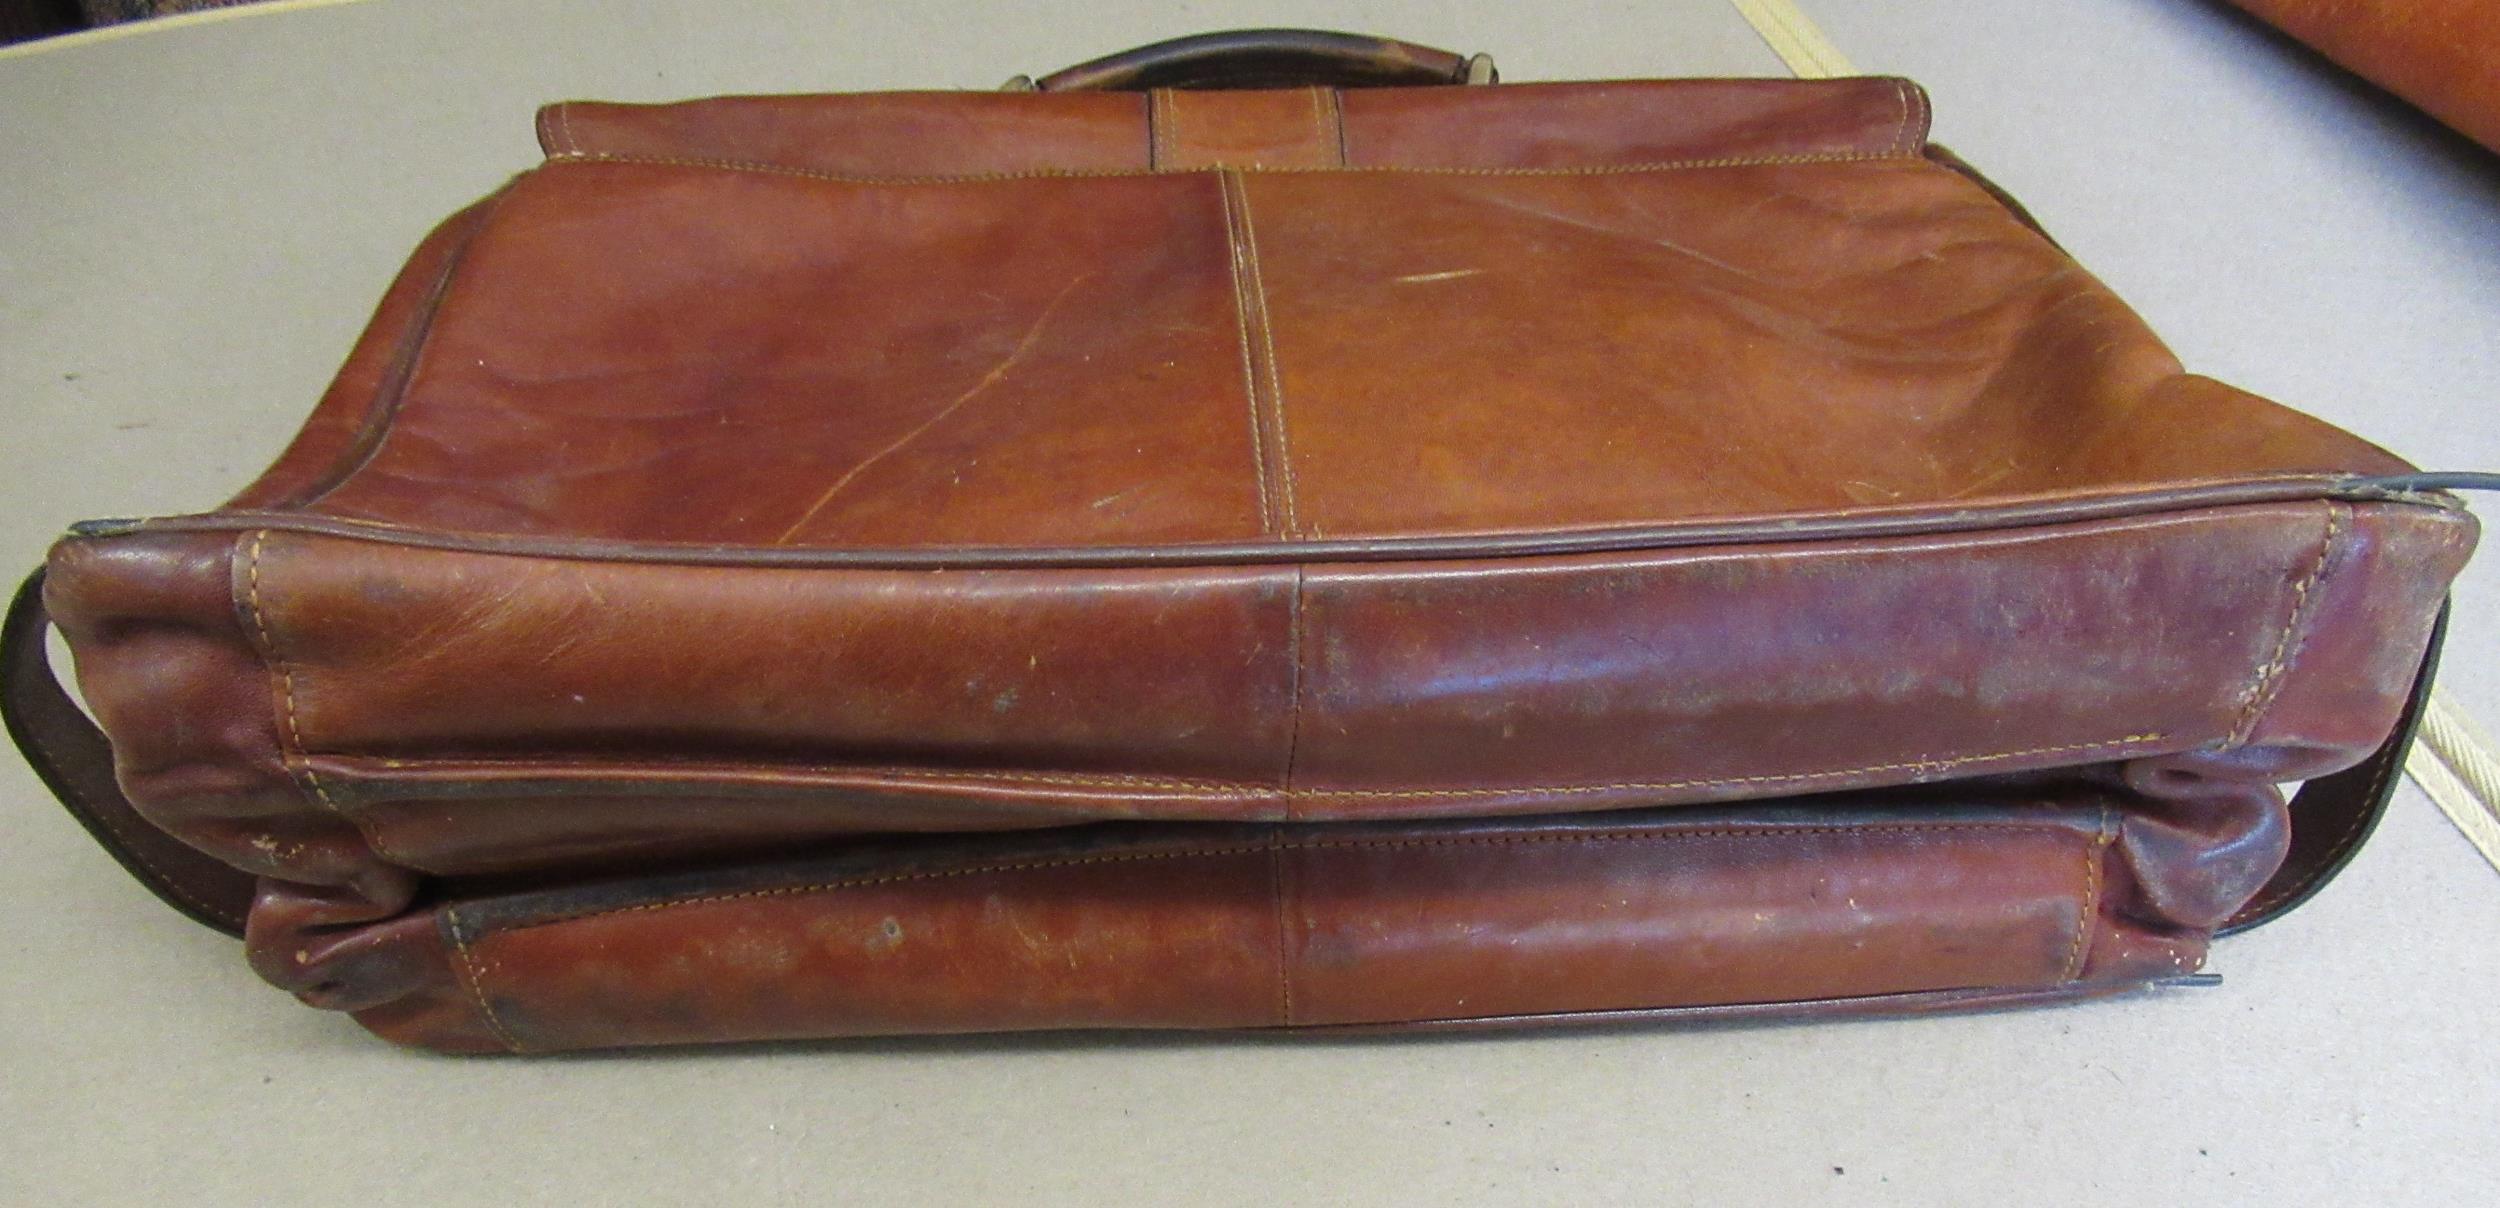 Tan leather attaché case by Piquadro, together with another leather briefcase Condition as shown - Image 6 of 17